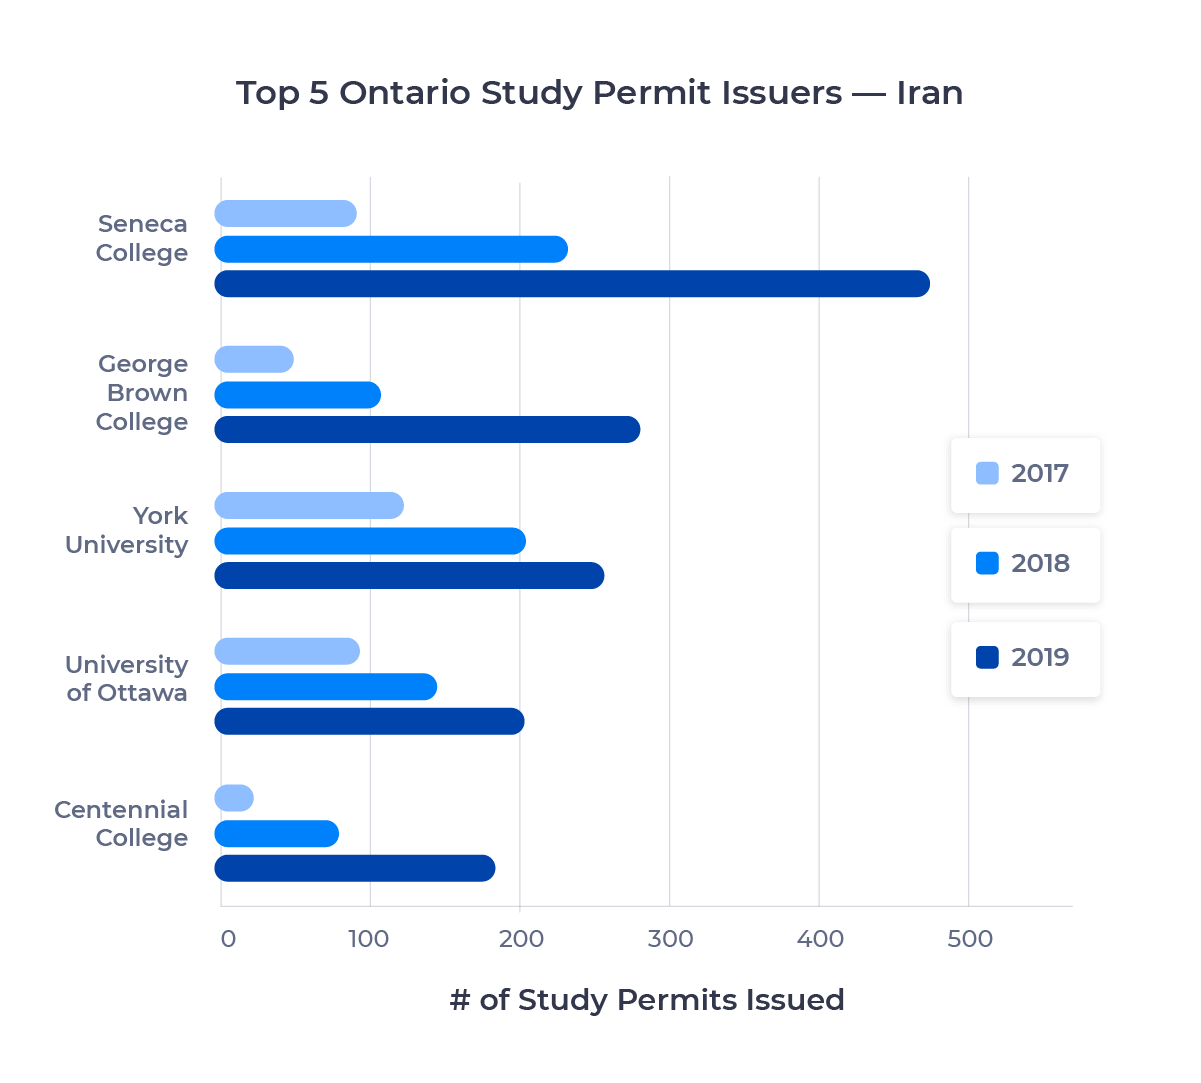 Bar chart showing the top five schools in Ontario for Iranian students by study permits issued. Described in detail below.